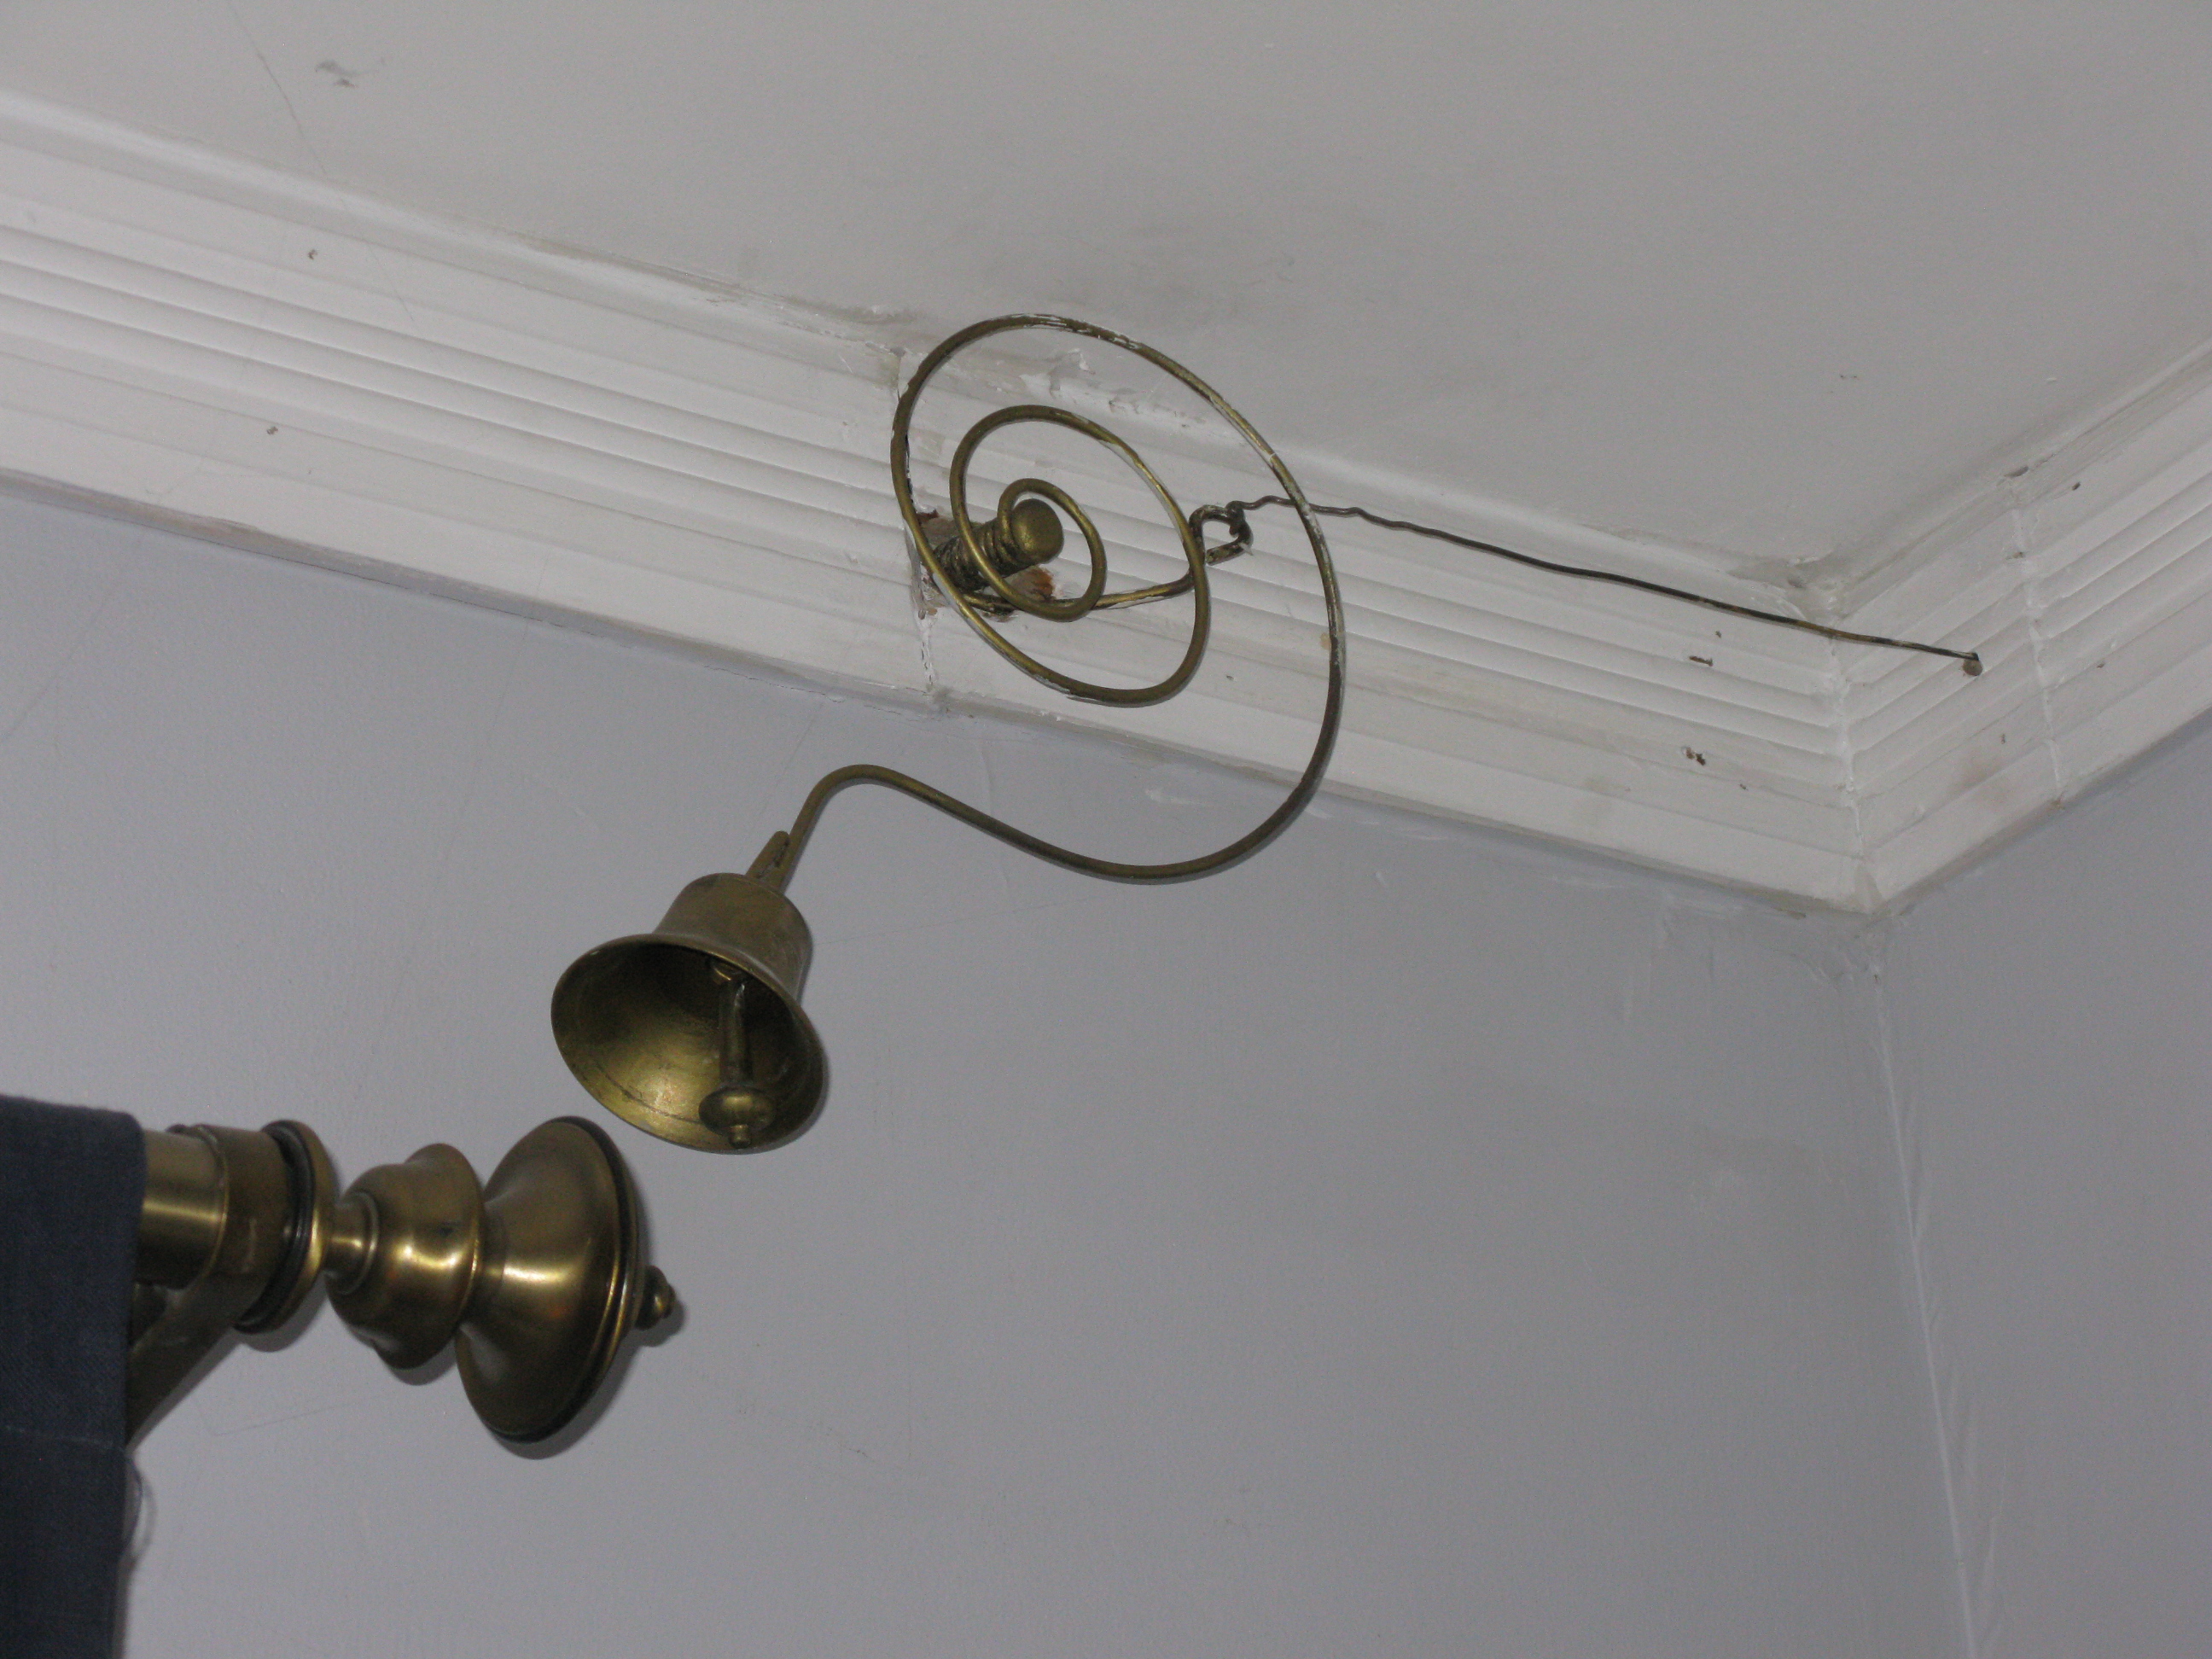 Antique door bell with original brass bell affixed to pull chain